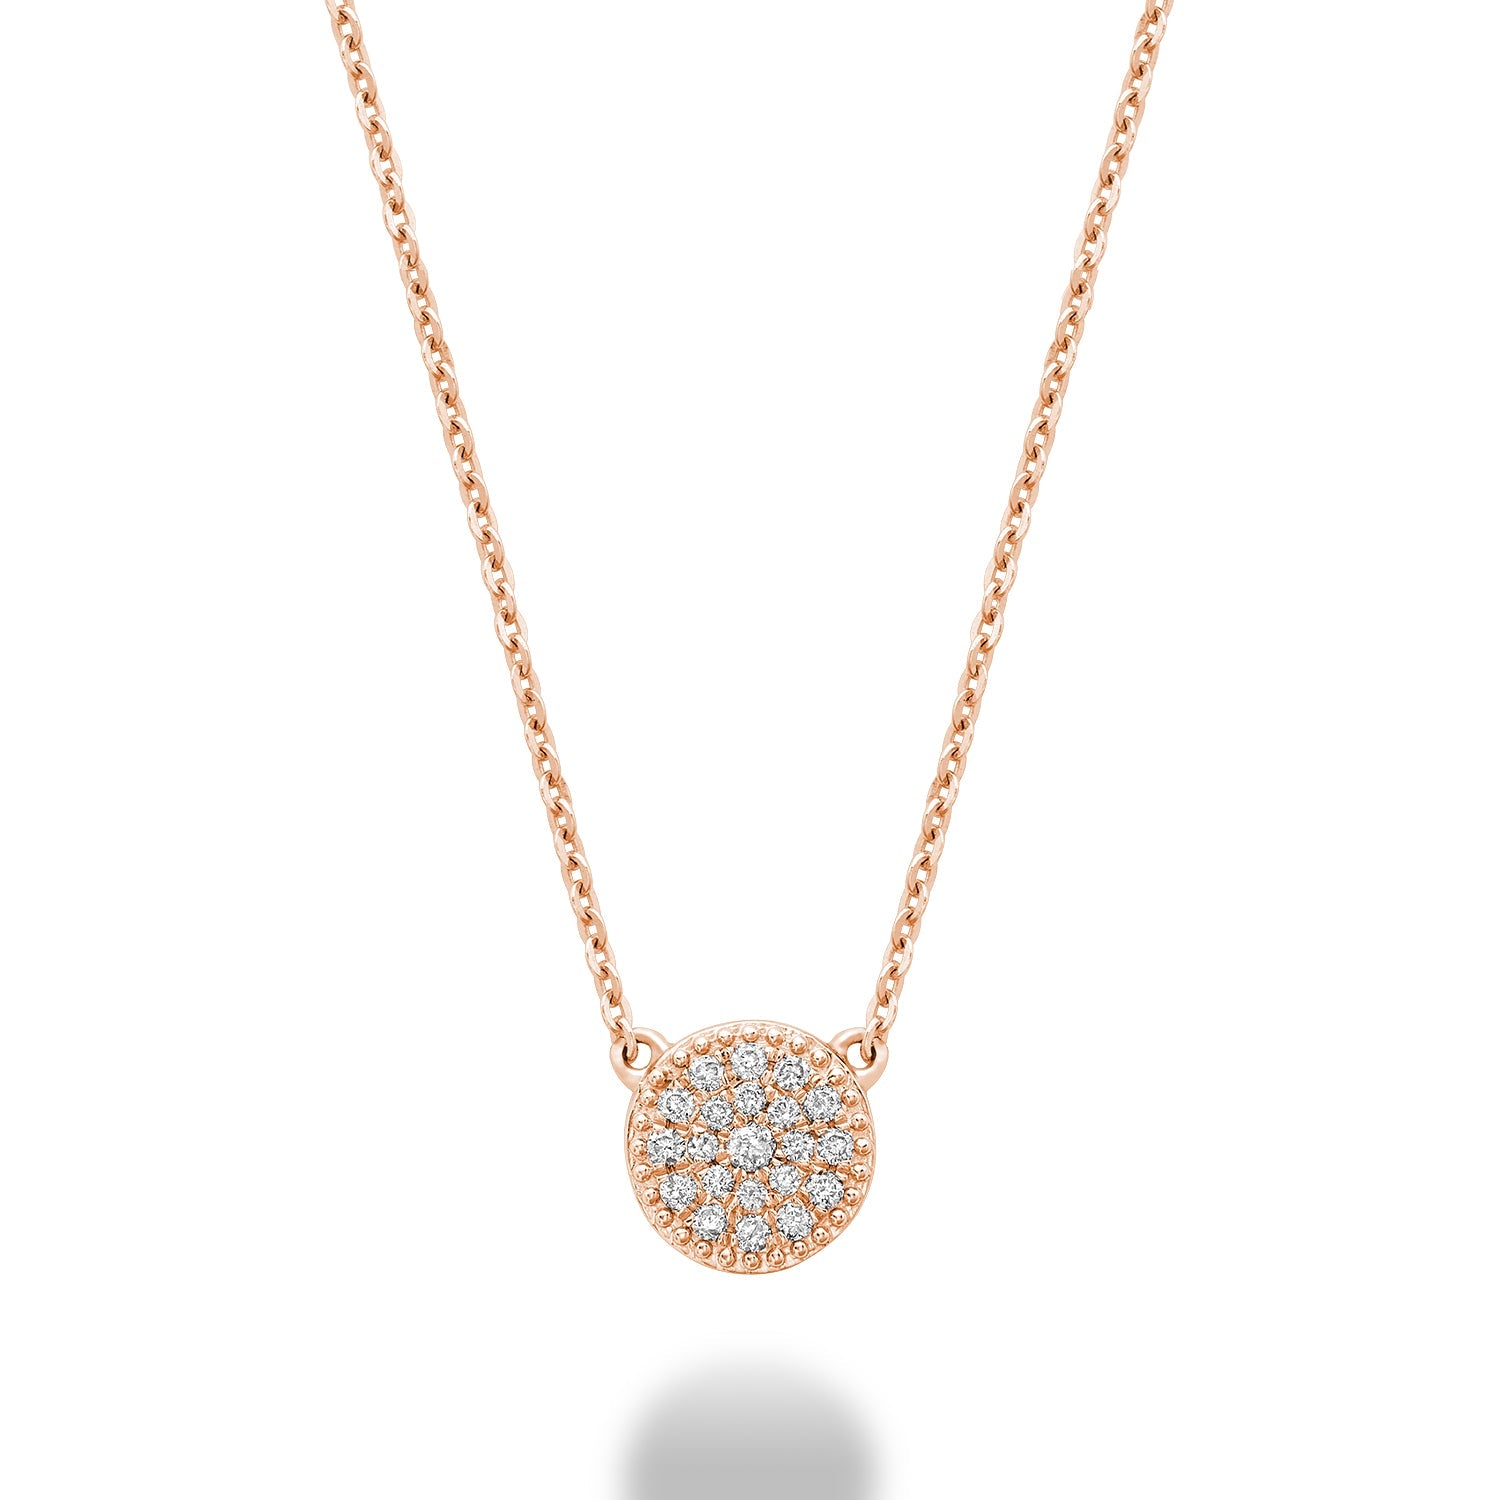 A close-up of a rose gold diamond pave necklace. The necklace features a total of 0.10ct of diamonds set in a pave style. The diamonds are sparkling and eye-catching.